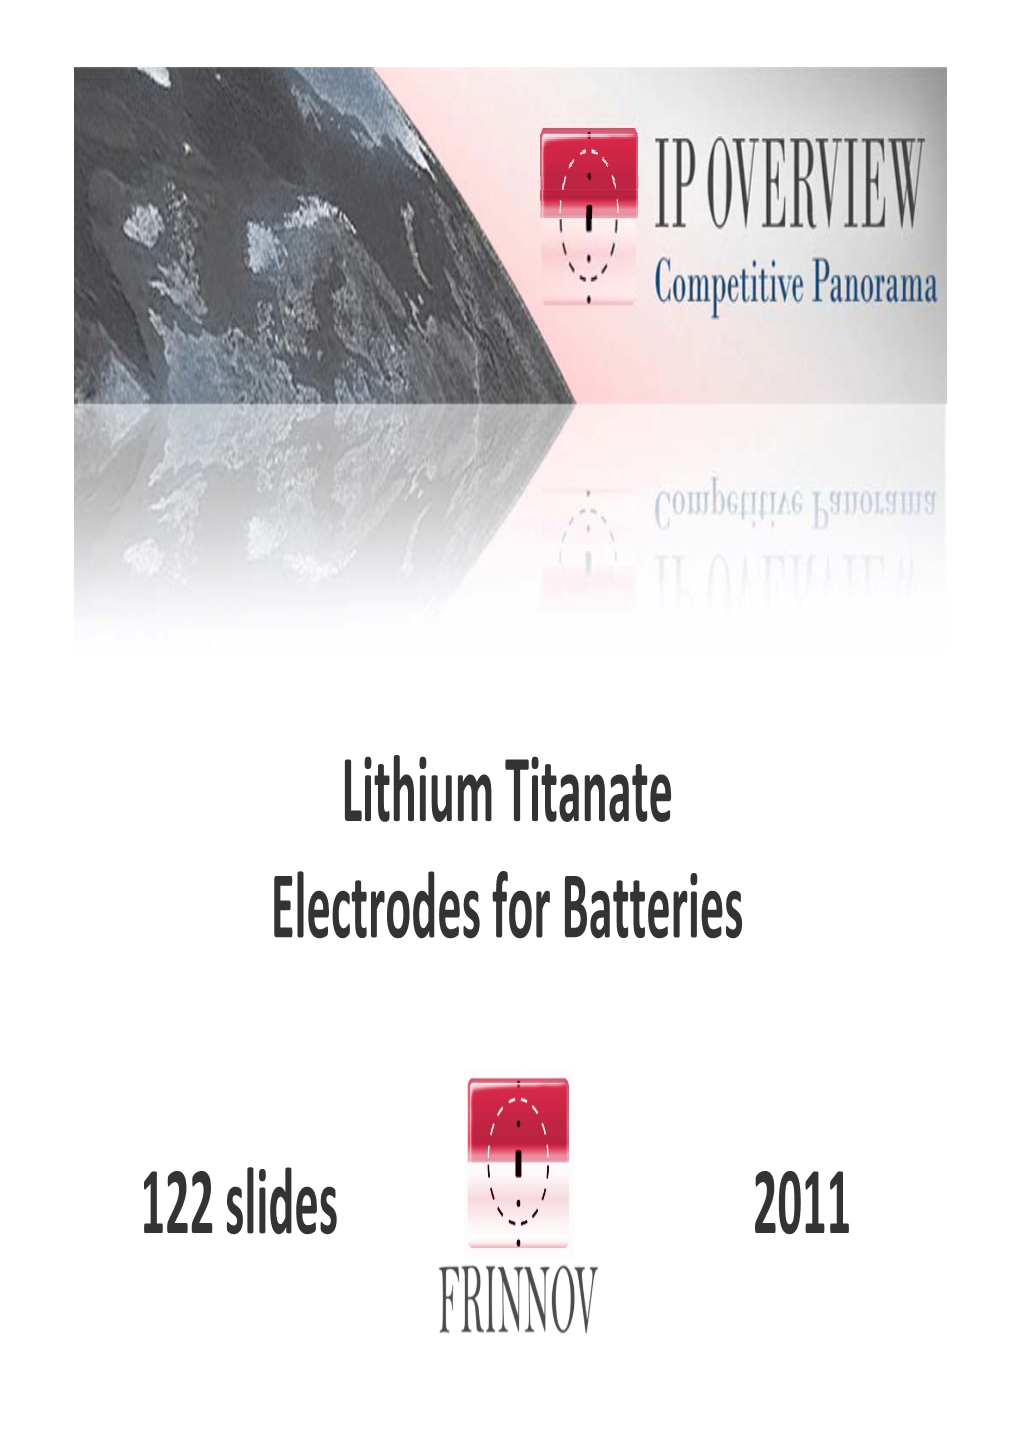 Lithium Titanate Electrodes for Batteries